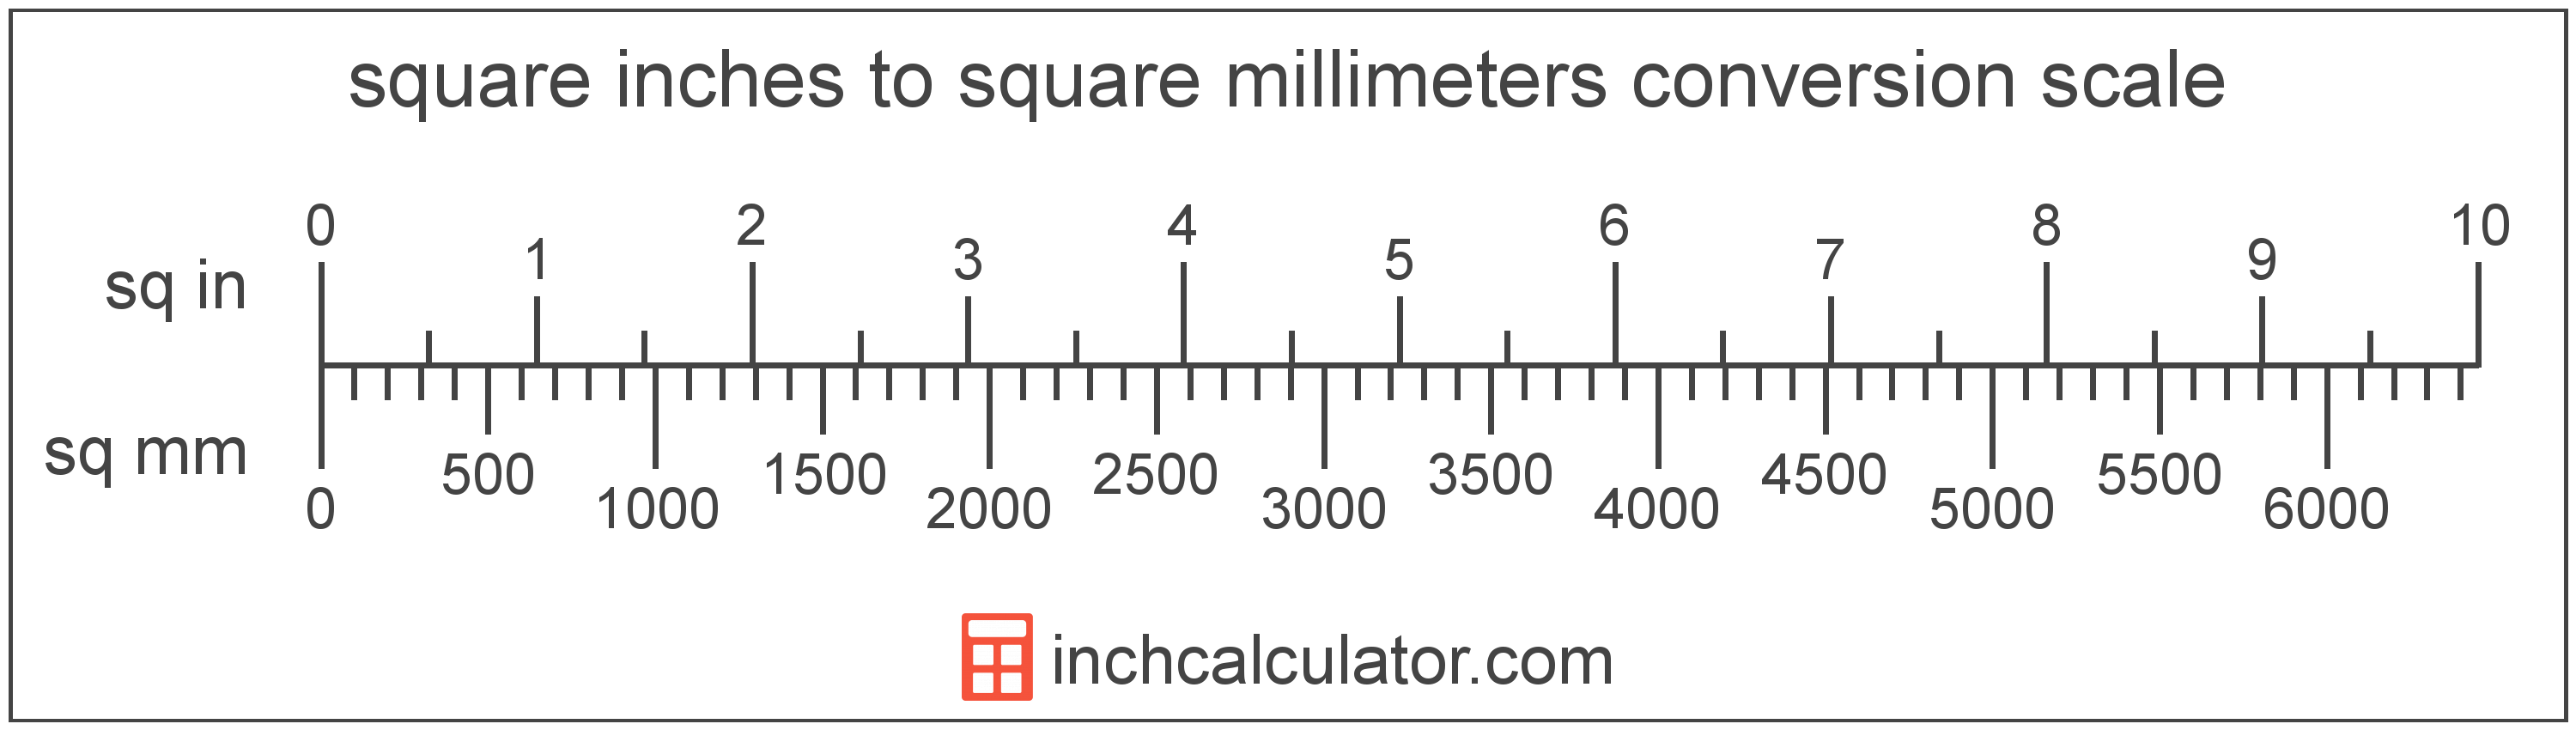 conversion scale showing square millimeters and equivalent square inches area values